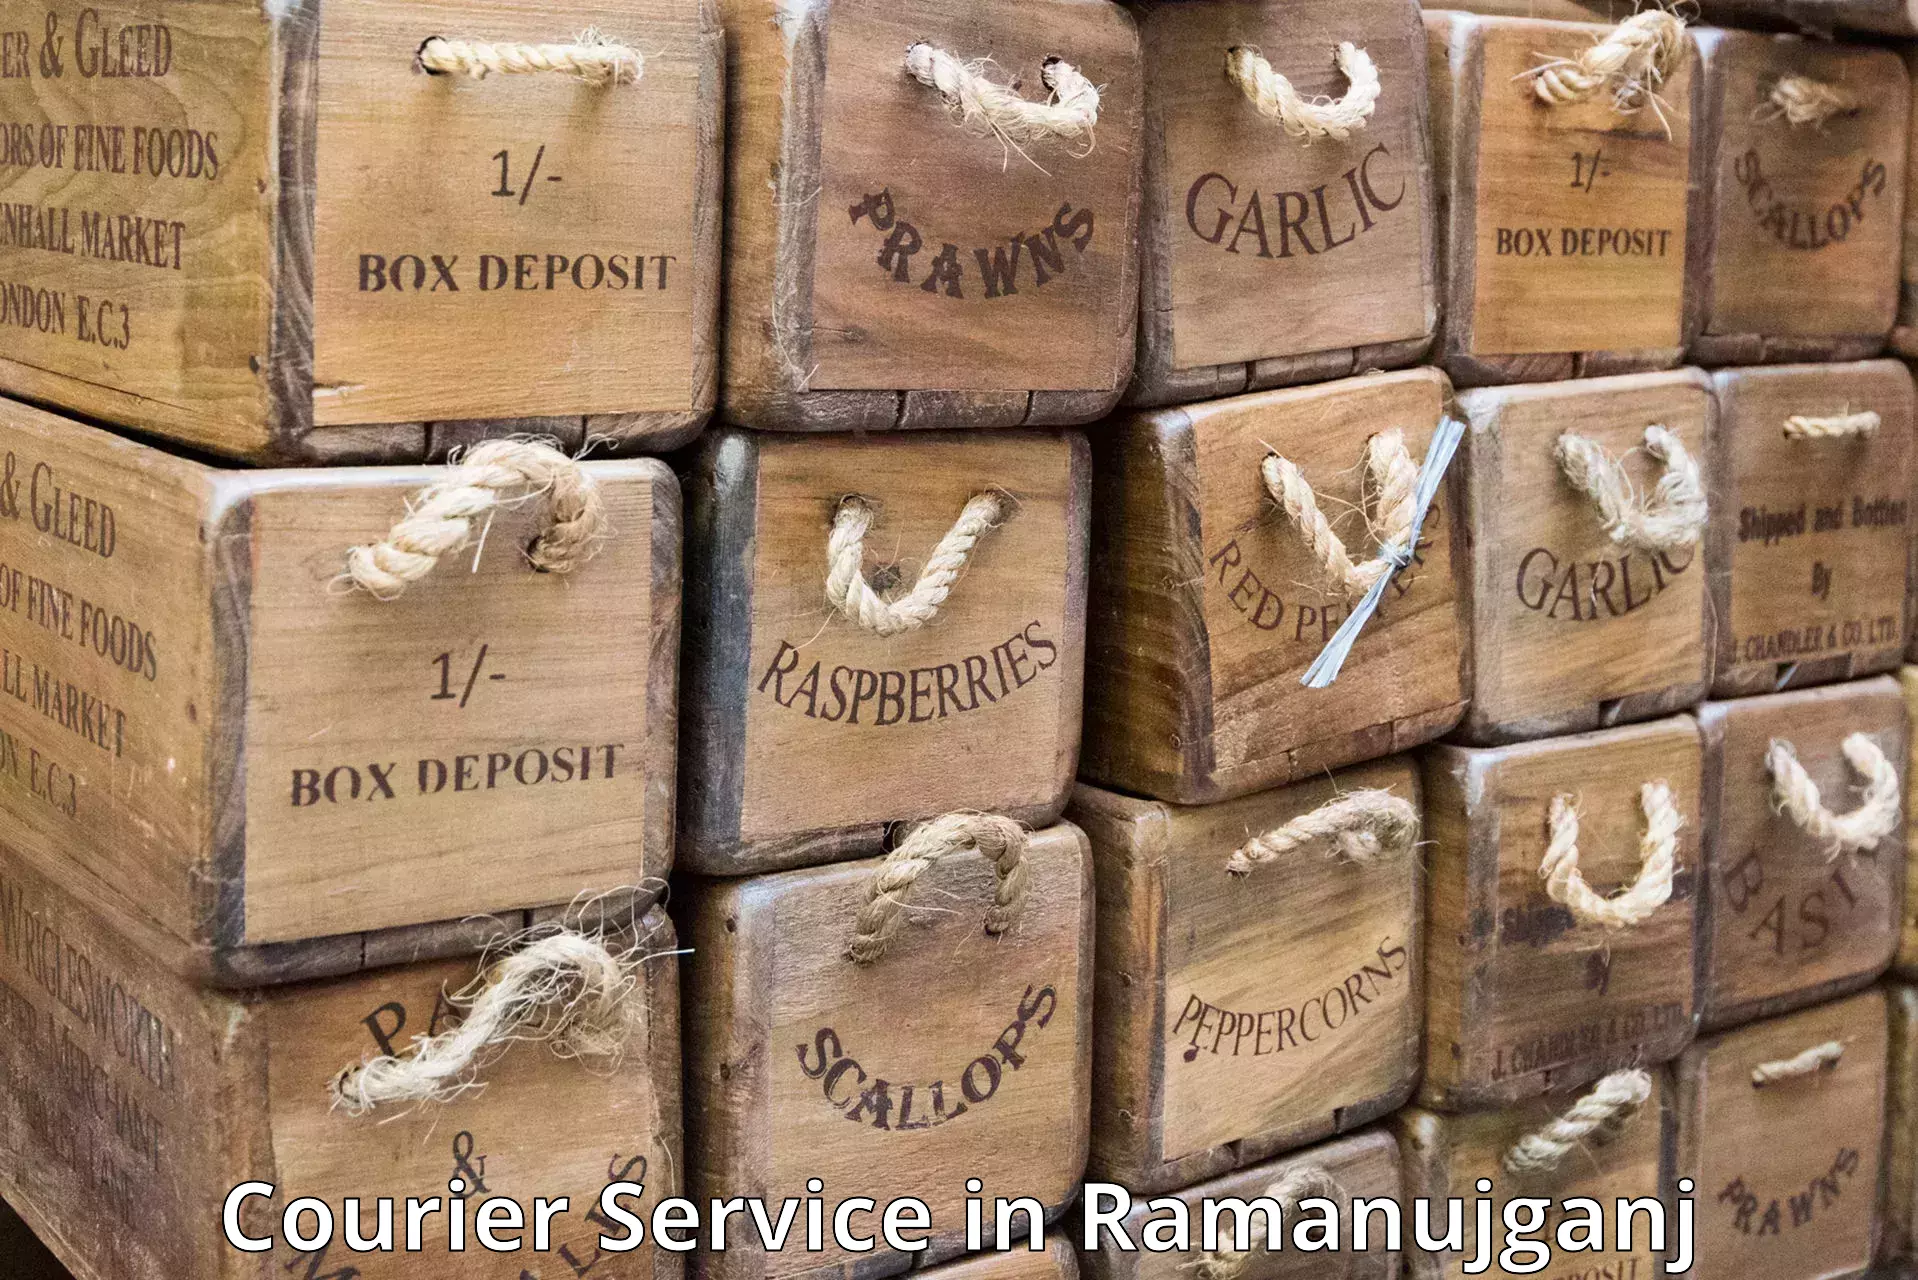 24-hour courier service in Ramanujganj